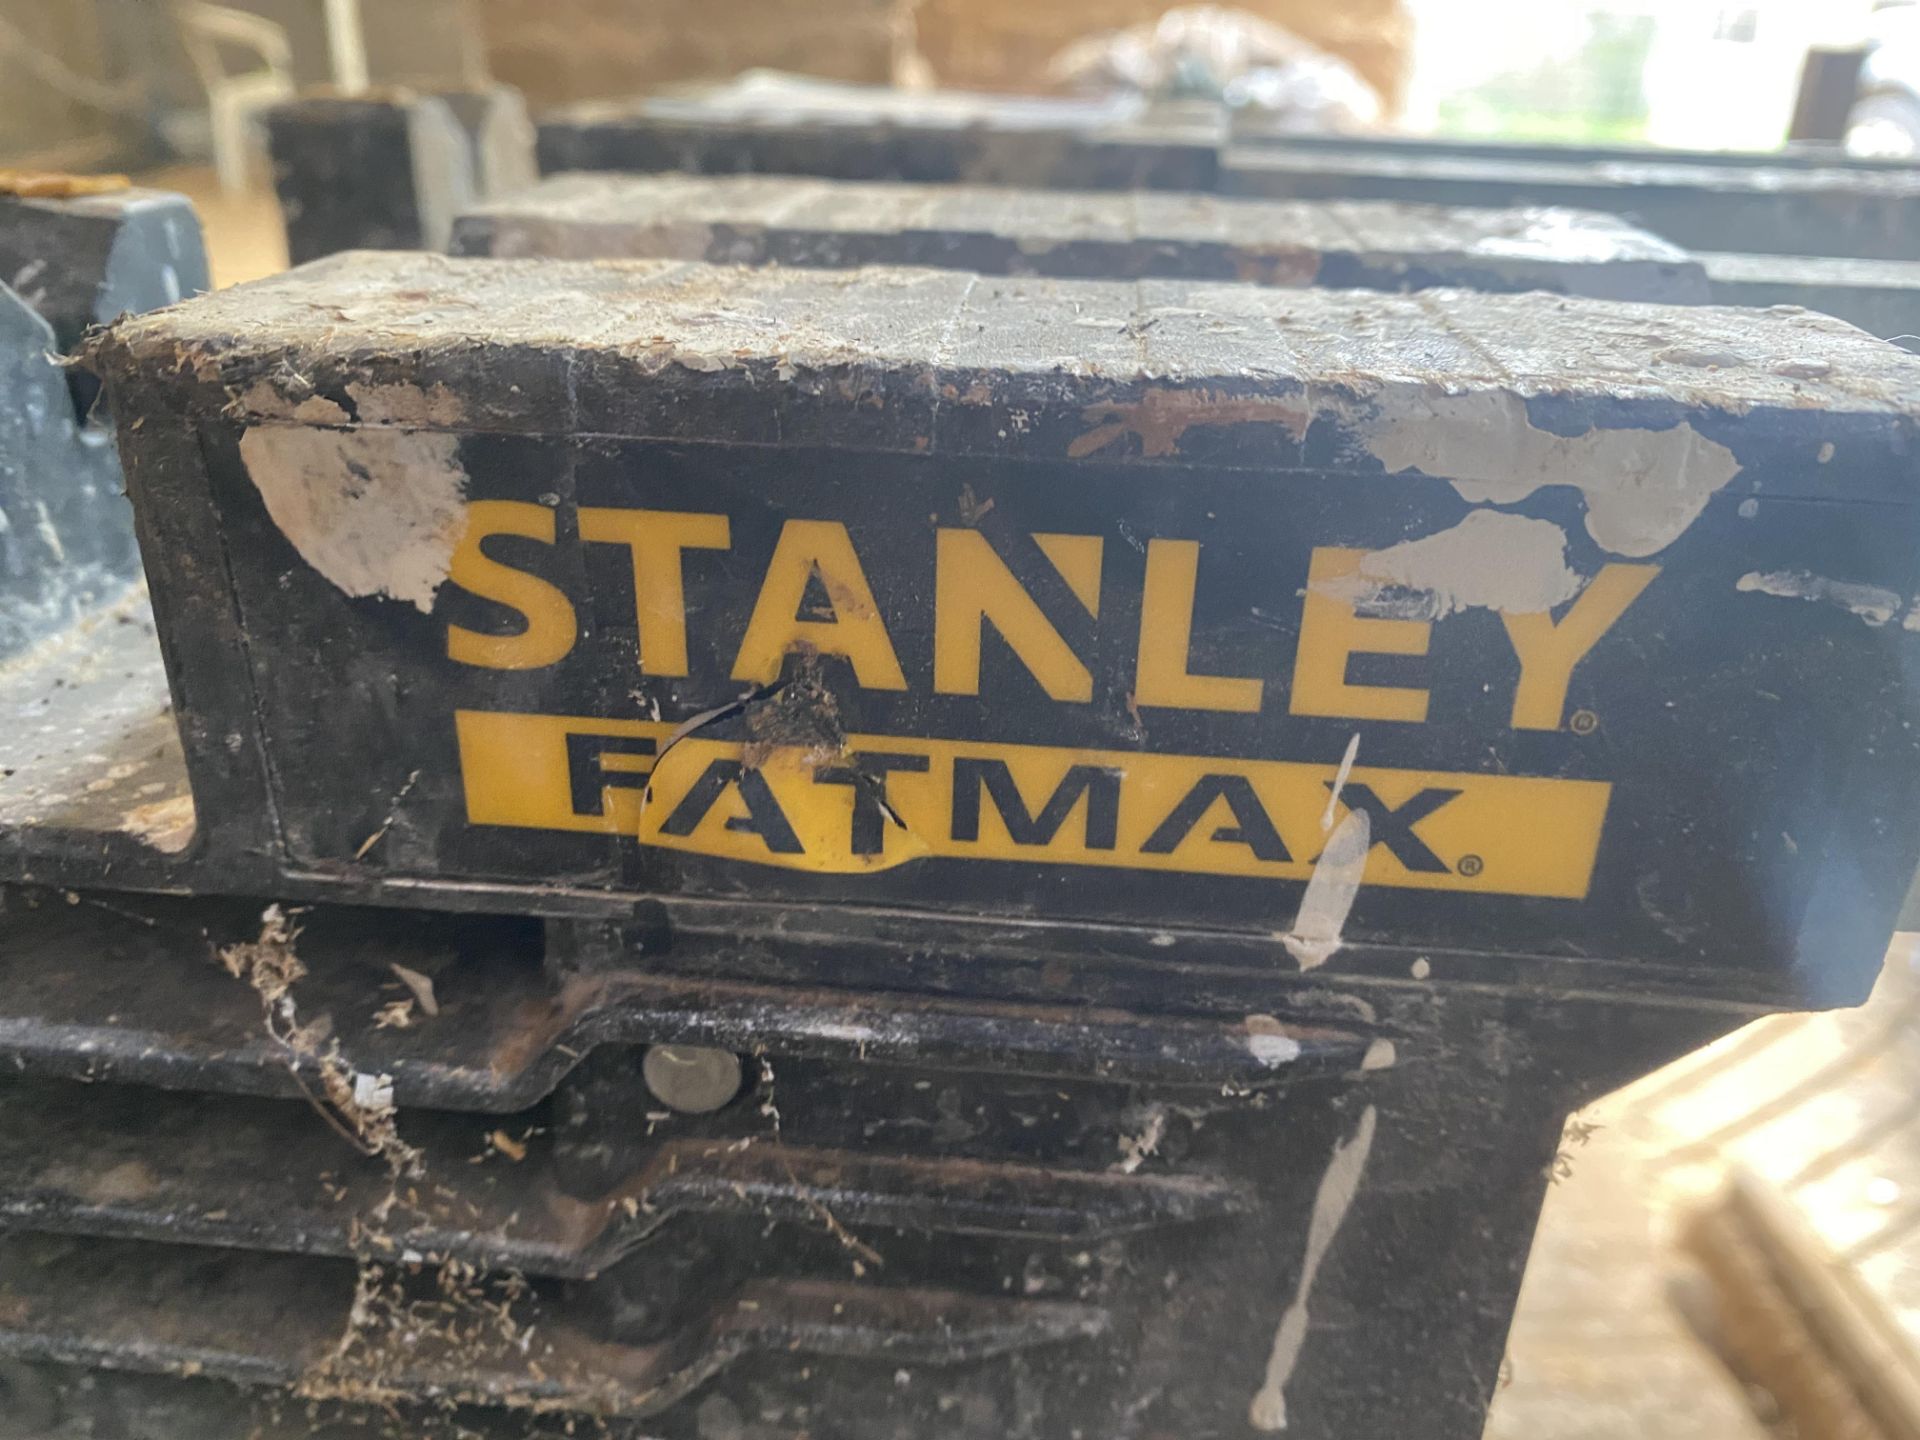 2 x Stanley Fatmax folding trestles Located at Coleton Fishacre, Brown Stone Road, Kingswear TQ6 - Image 2 of 3